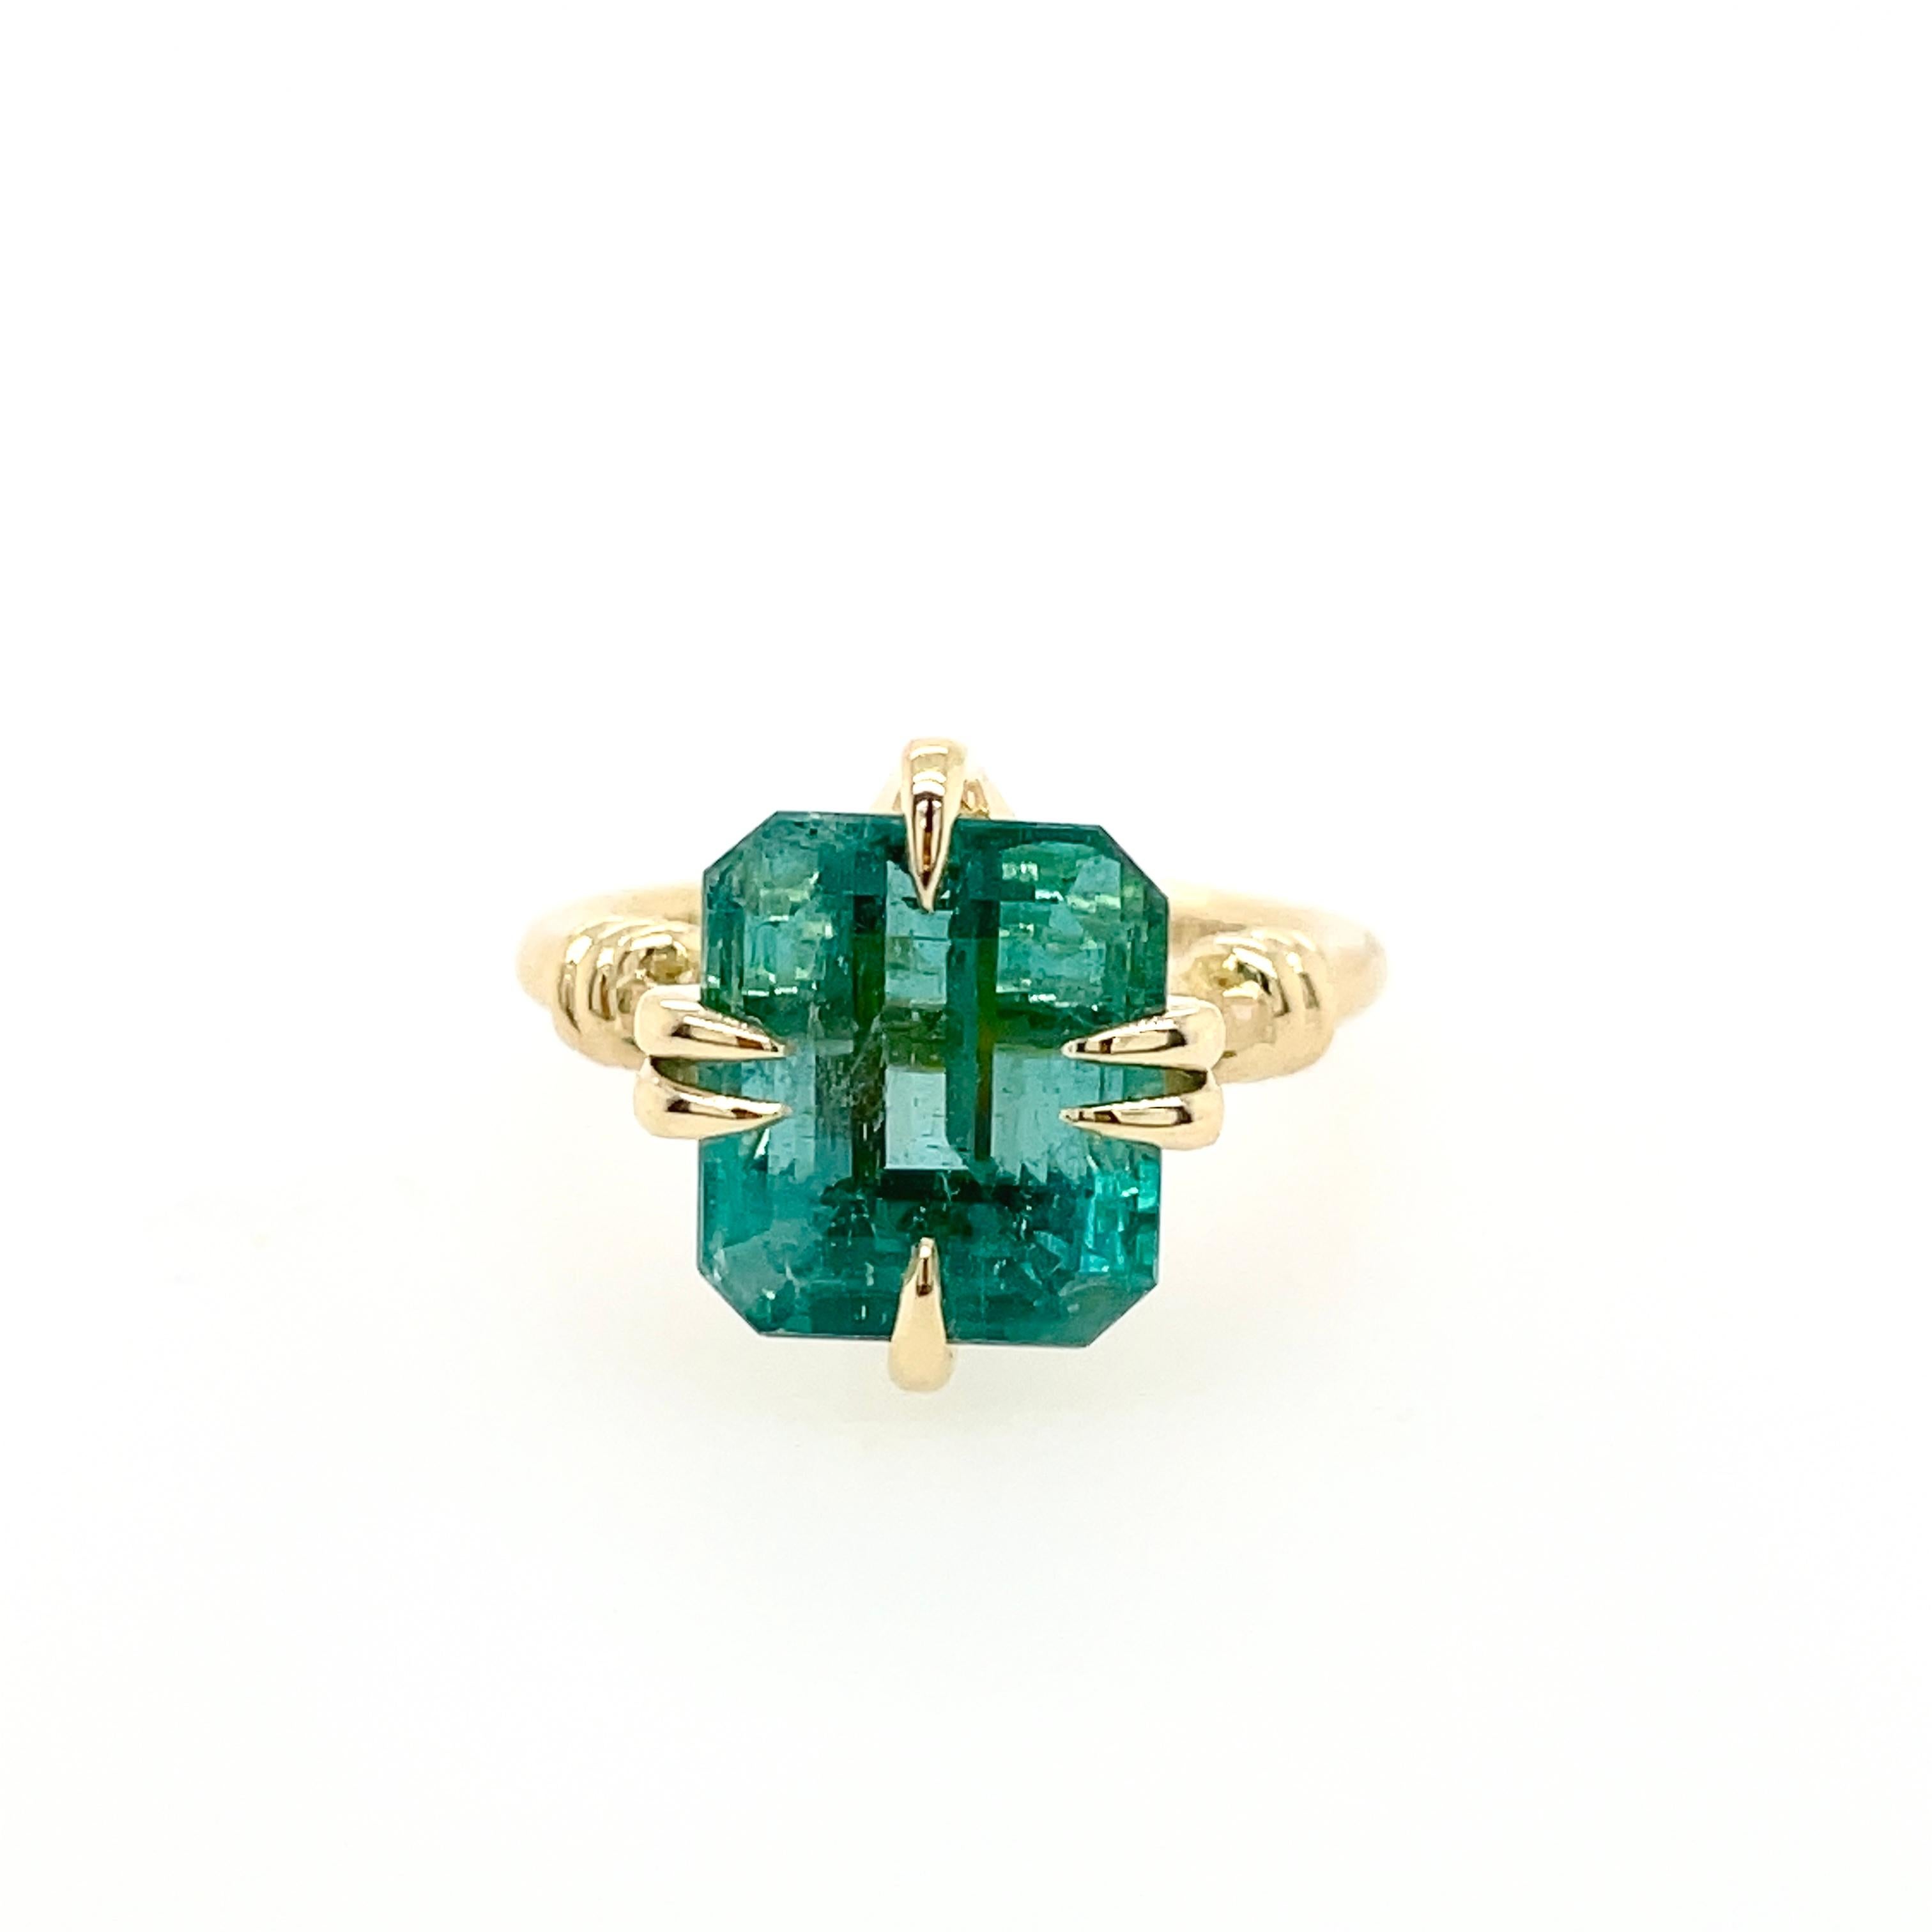 Glamorously bold and unabashedly seductive. This showstopper ring features an 5.35ct emerald cut Zambian emerald  poised between sharp eagle style talons and embraced by powerful golden reefs knotted ropes.

Handcrafted in 18ct yellow gold
Ethically